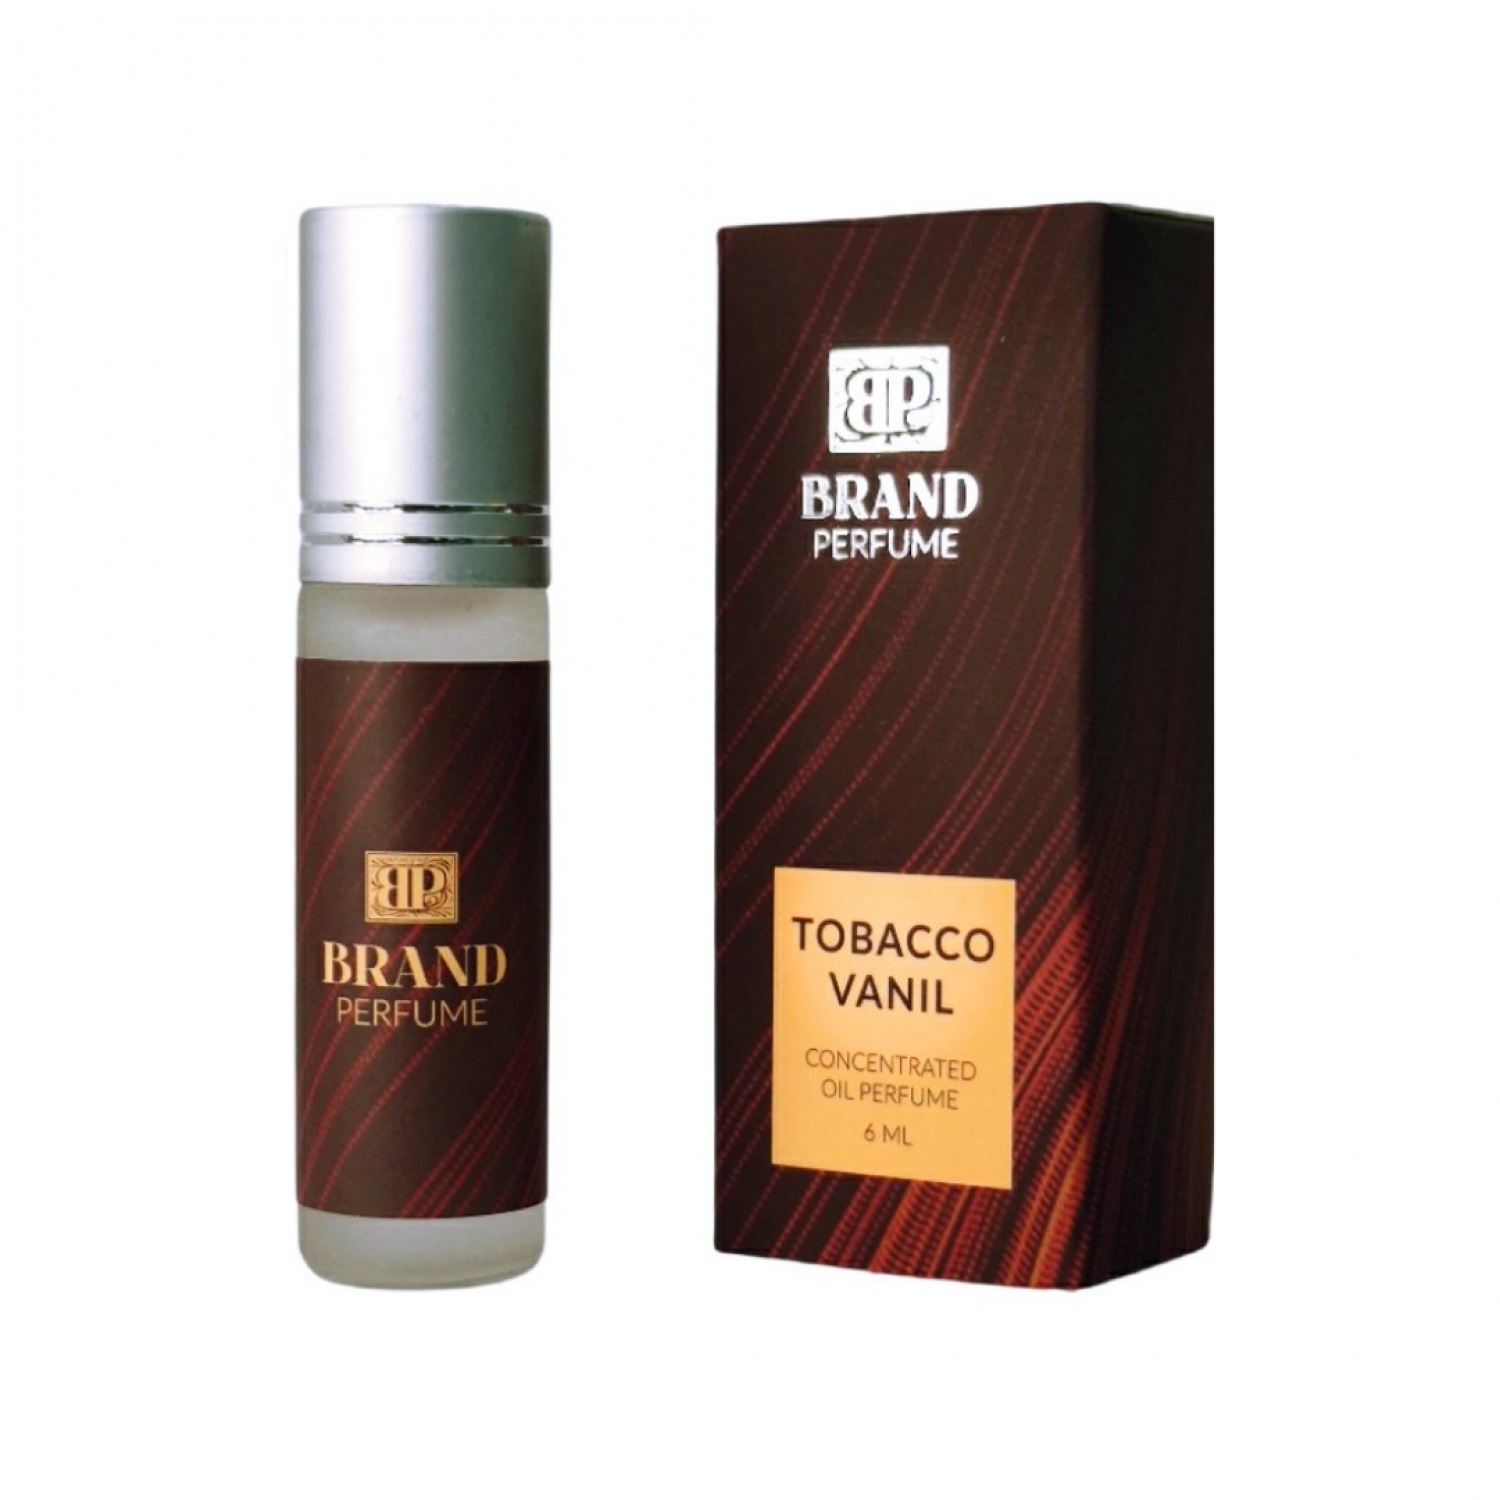 TOBACCO VANIL Concentrated Oil Perfume, Brand Perfume (Концентрированные масляные духи), ролик, 6 мл.